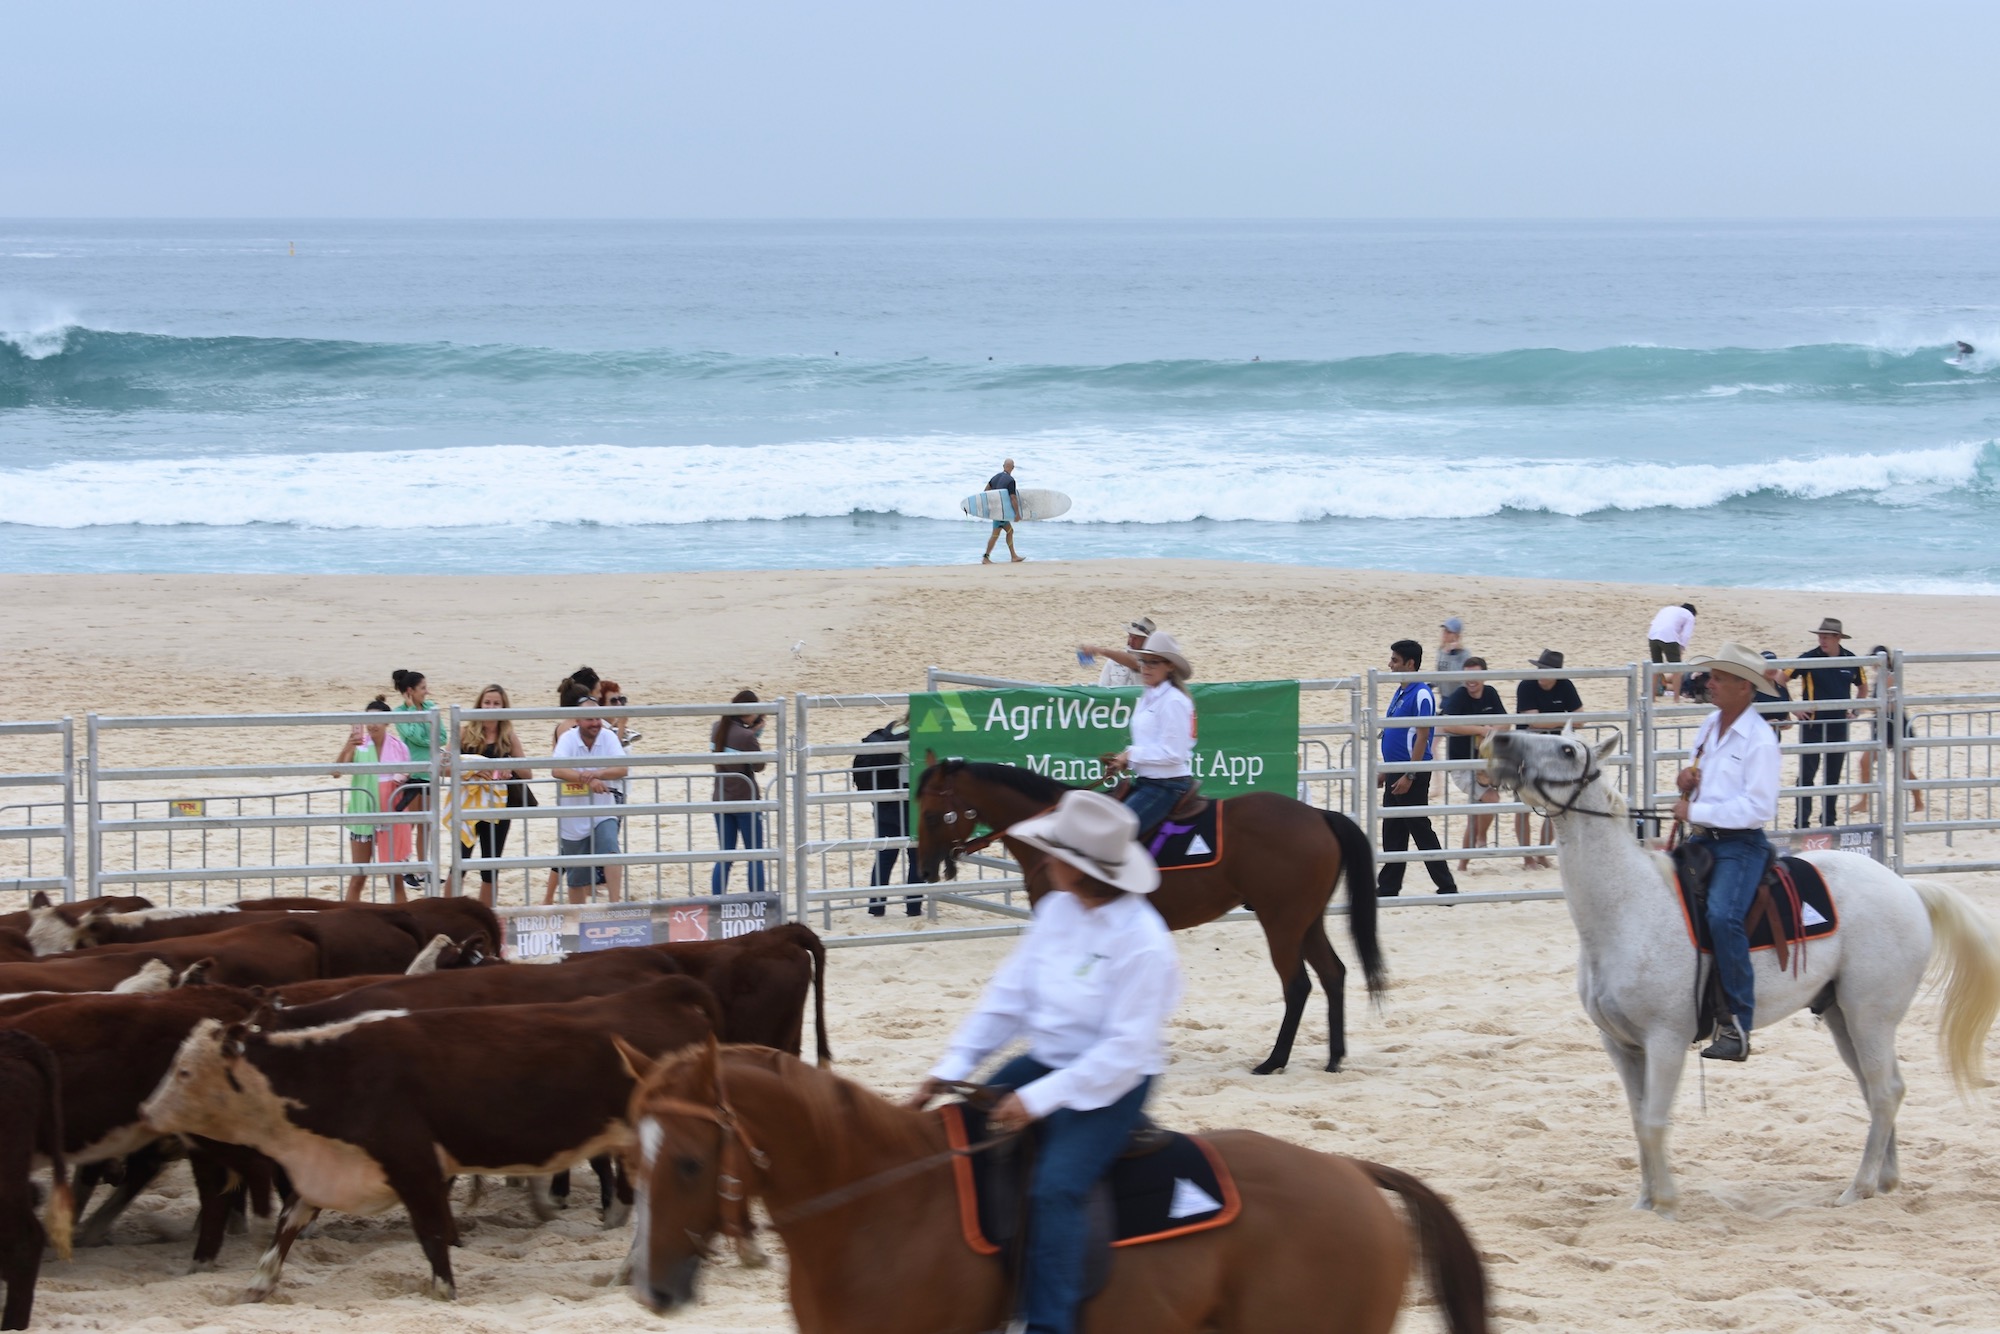 "The connection between a cattle drive and organ transplants is a bit ambiguous, but I think I get it." Bondi Beach. Photography by Alex Tighe